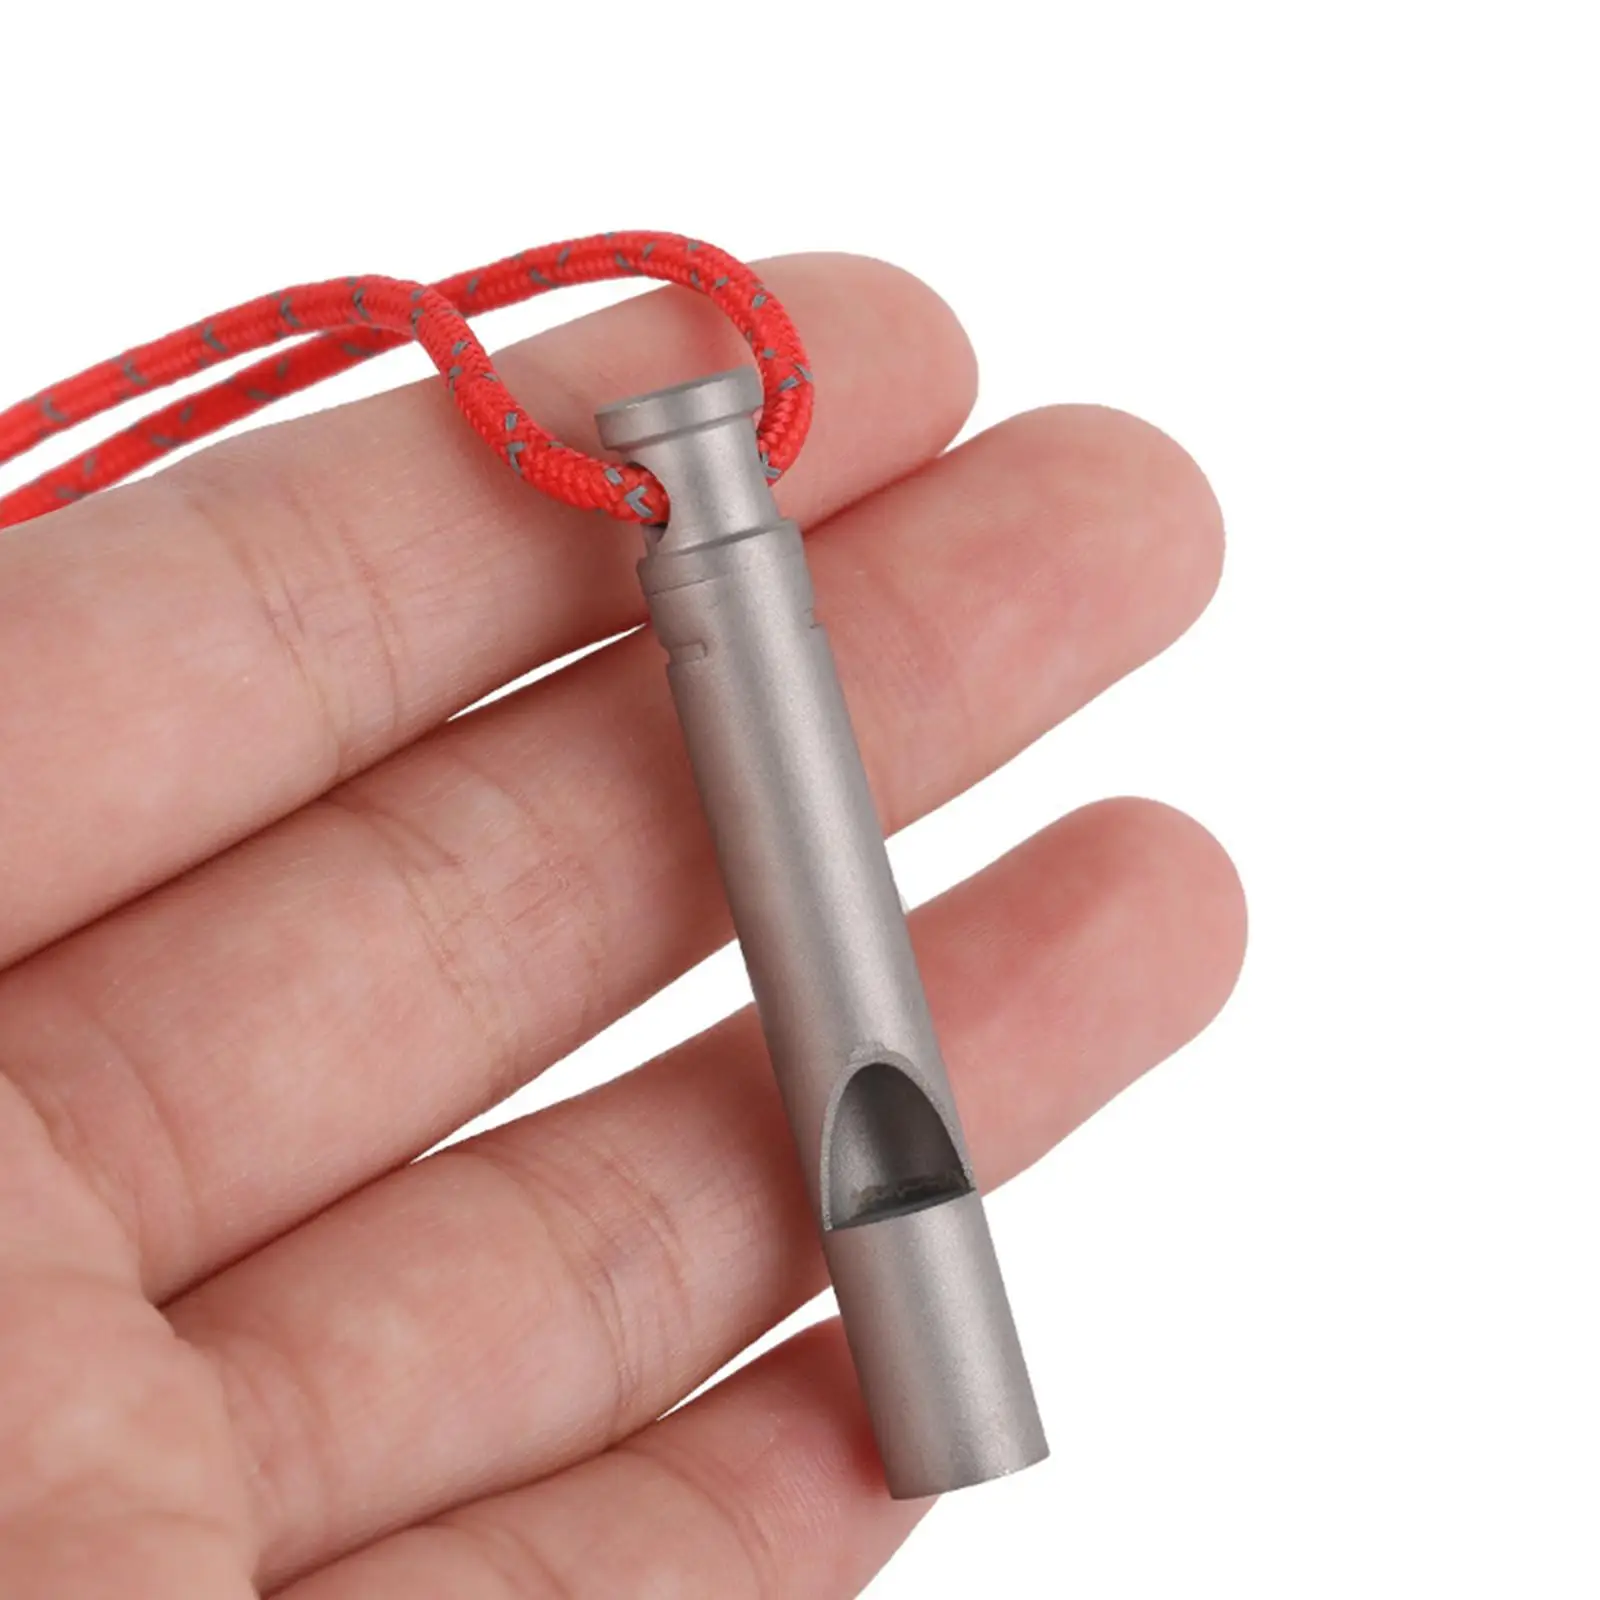 Loud Titanium Emergency Whistle with Cord Equipment for Hiking Exploring